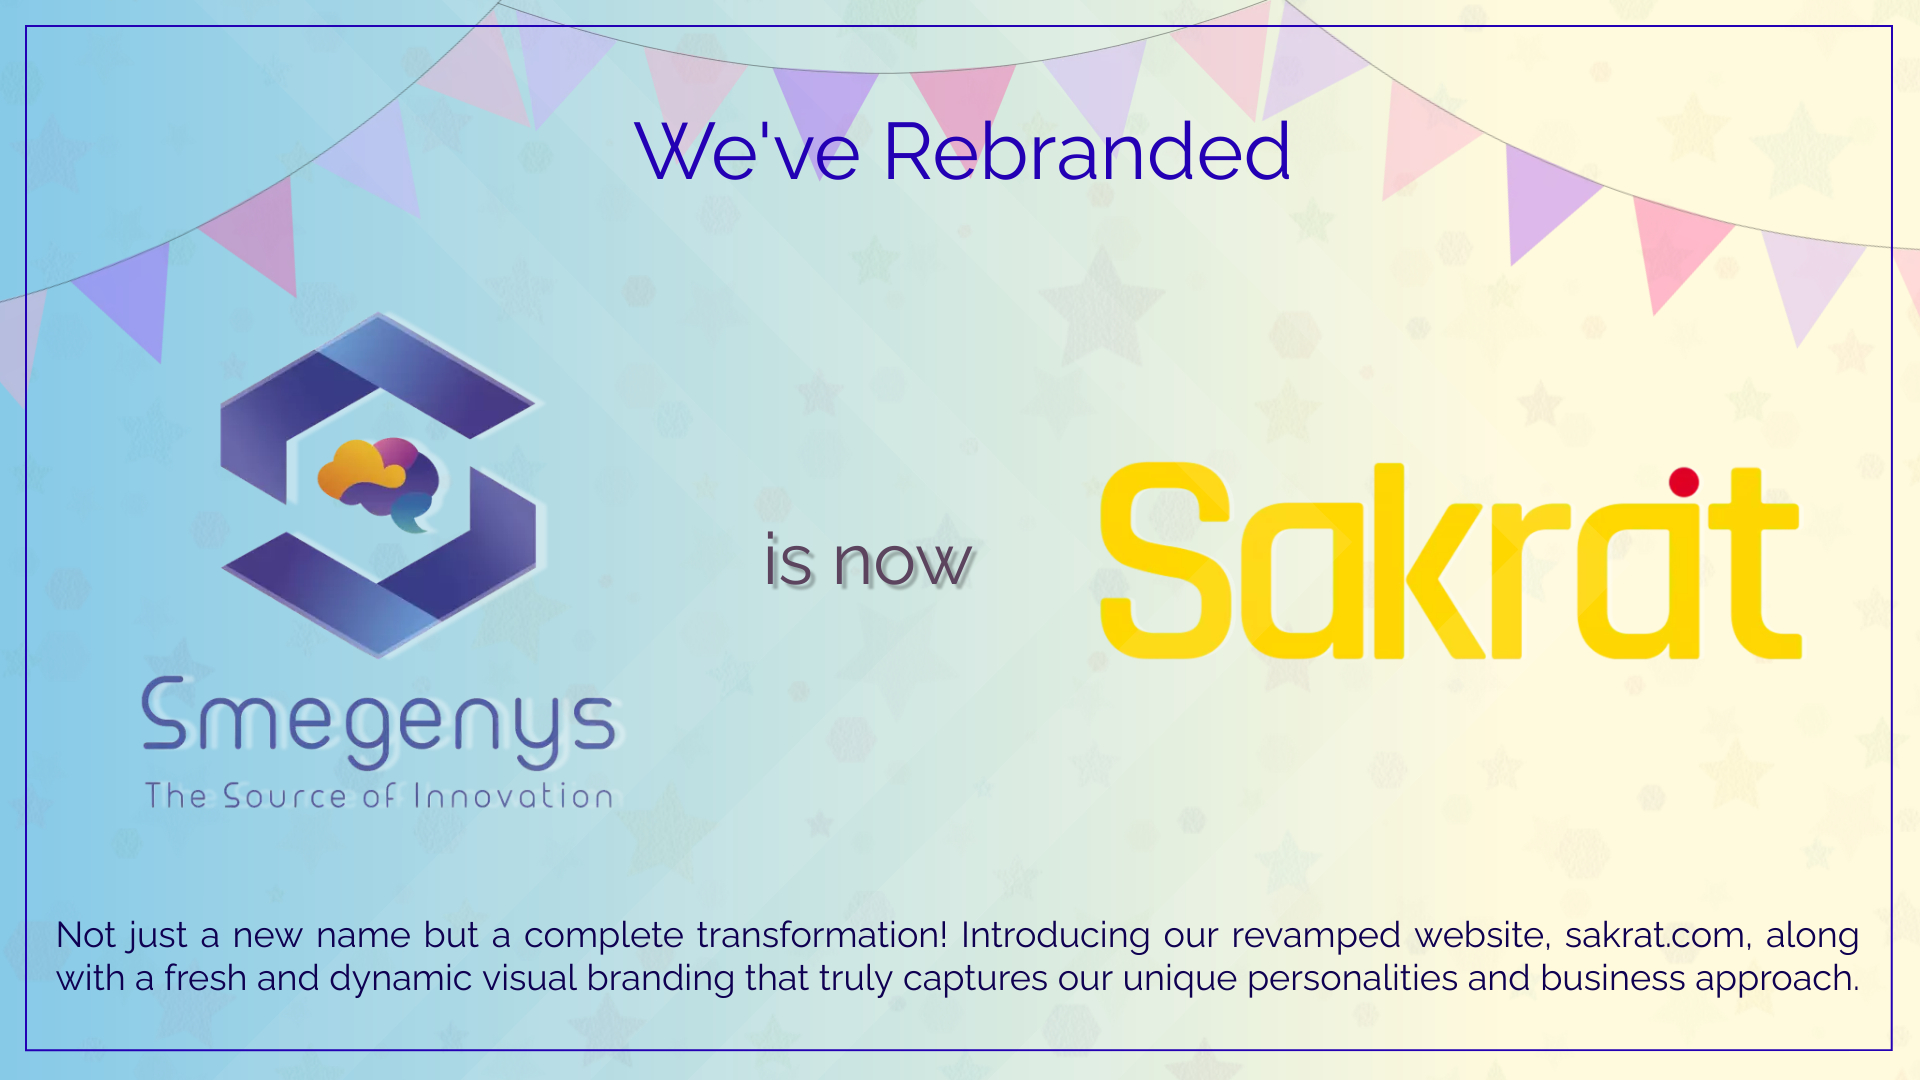 Smegenys is now Sakrat. You can reach us on www.sakrat.com